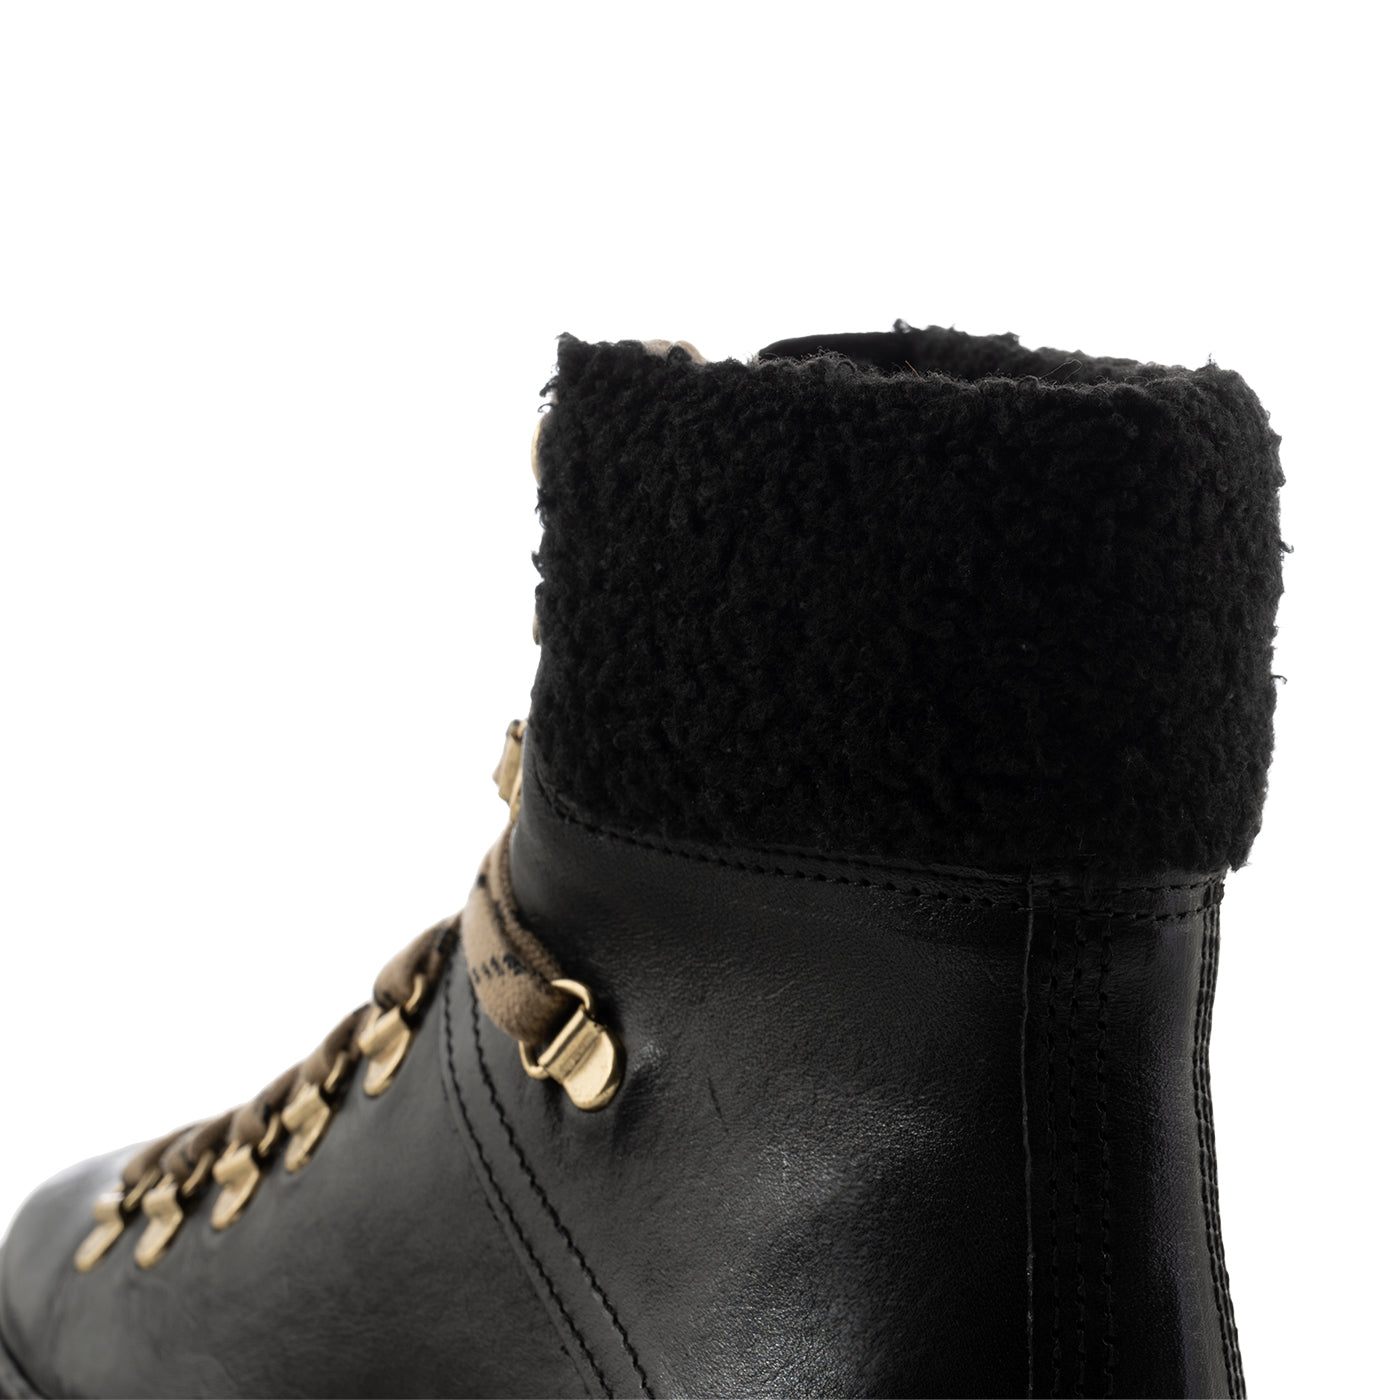 SHOE THE BEAR WOMENS Agda boot leather warm Boots 110 BLACK